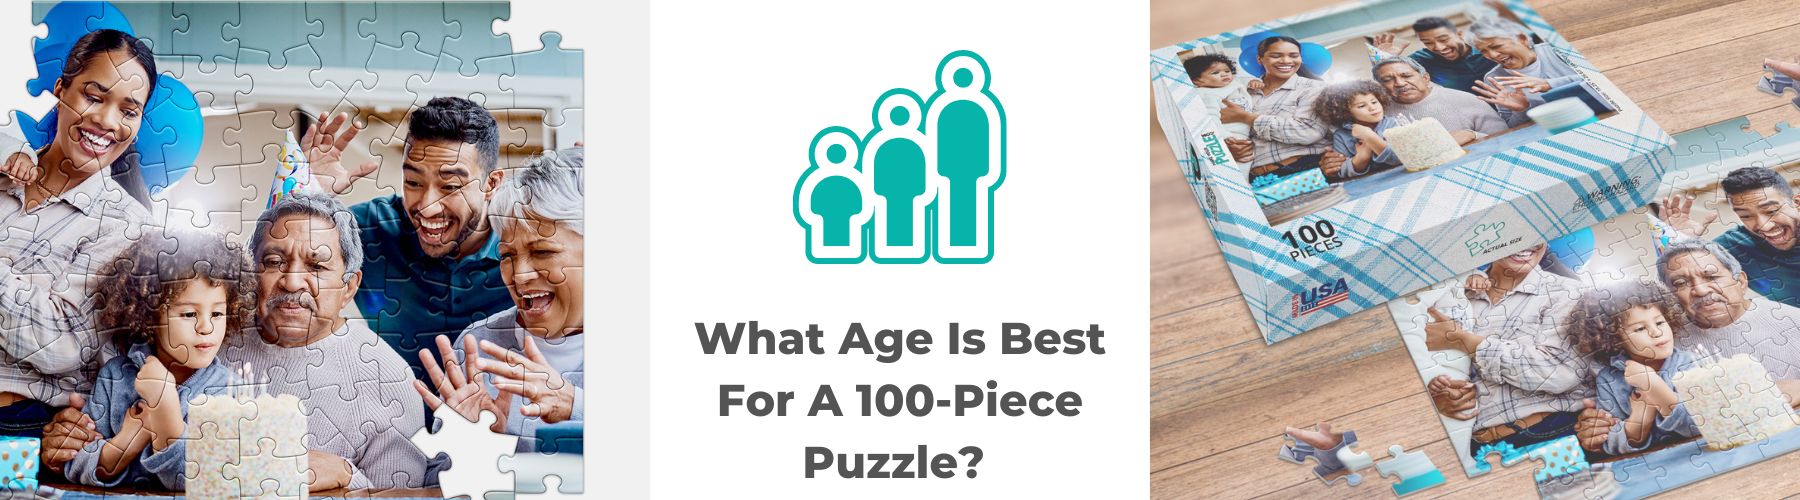 What Age Is Best for a 100-Piece Puzzle?